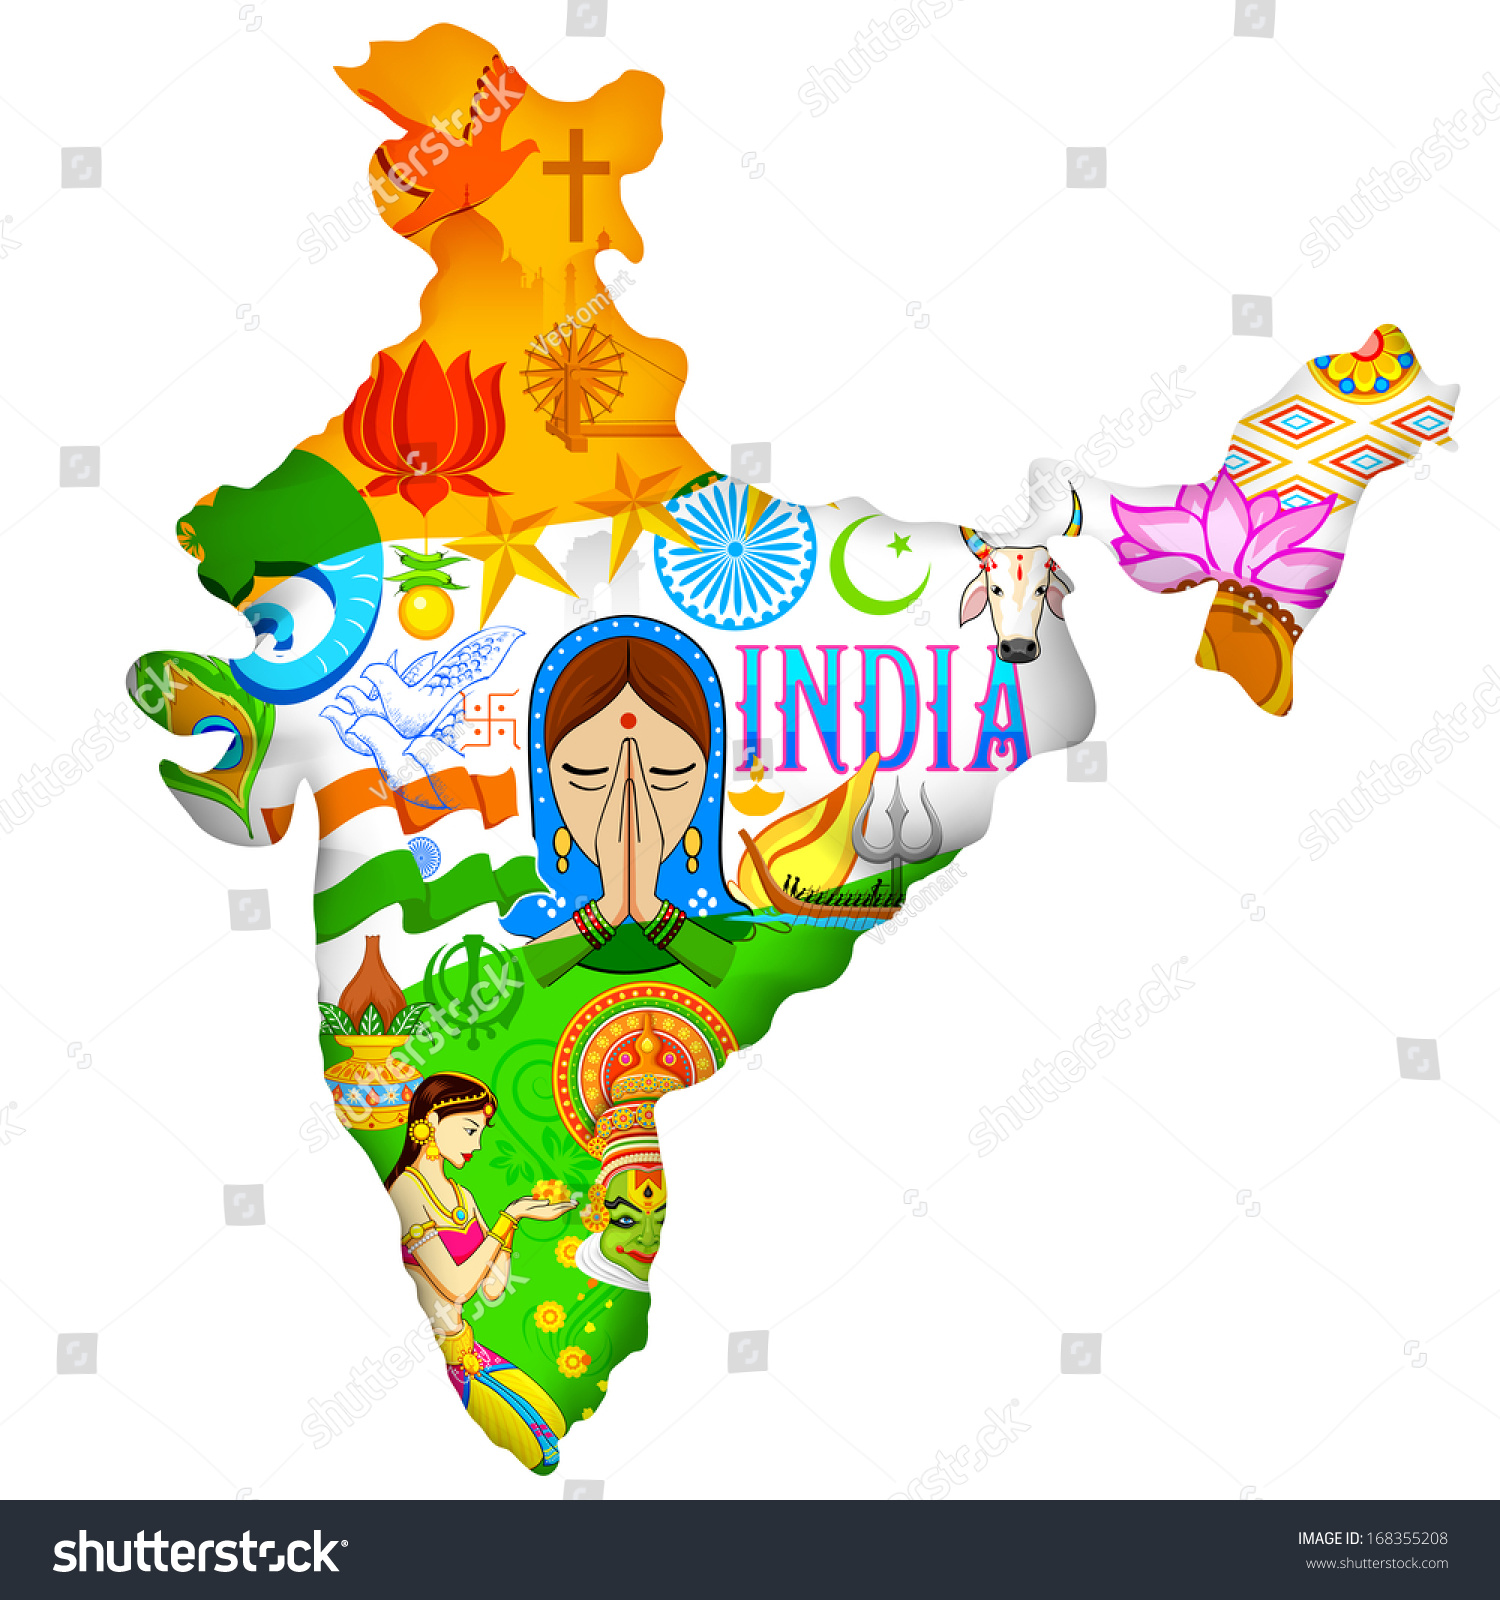 clipart of indian map - photo #26